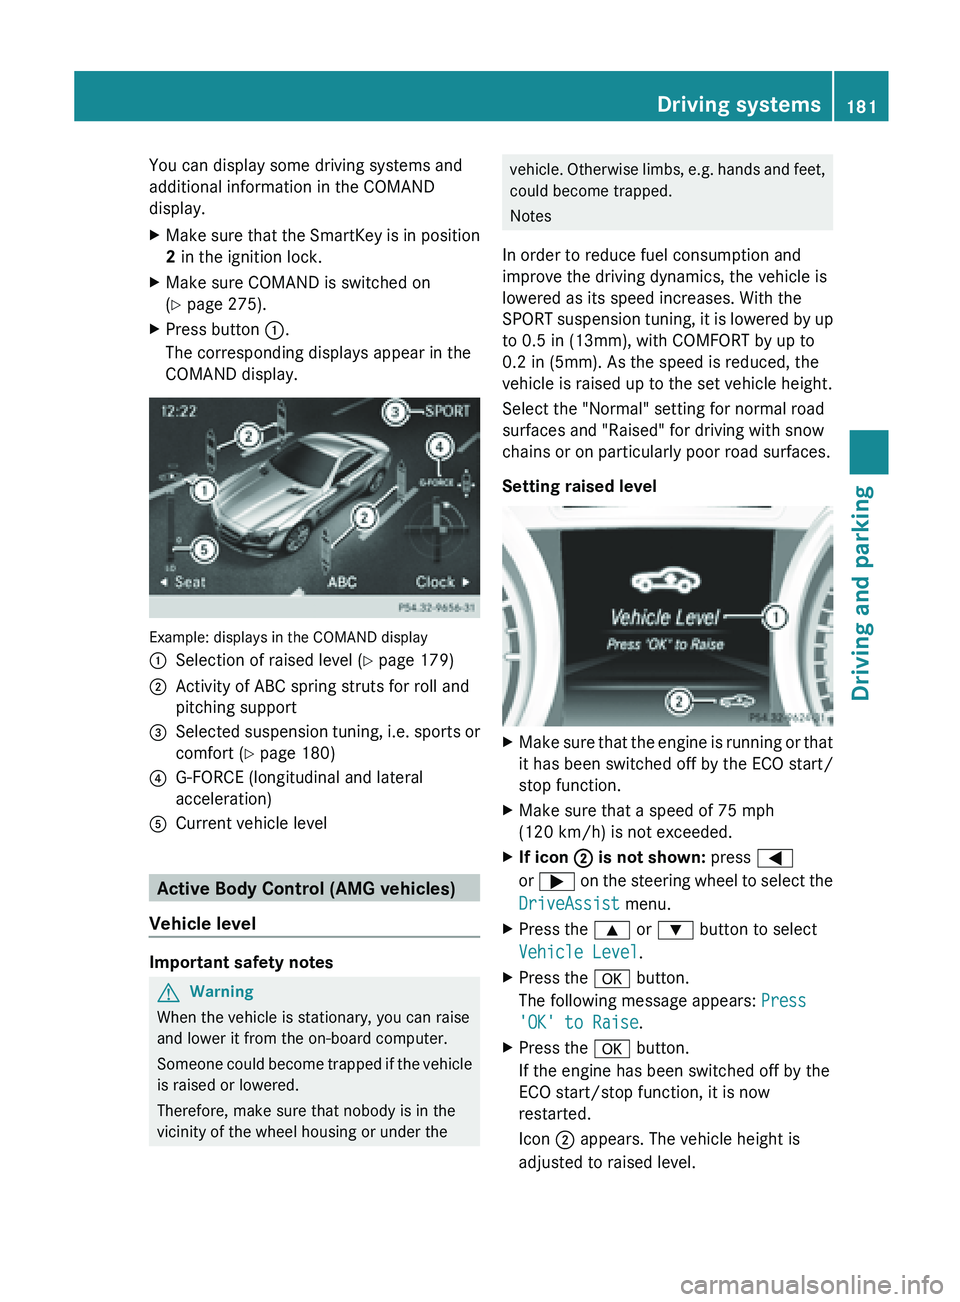 MERCEDES-BENZ SL-CLASS ROADSTER 2013  Owners Manual You can display some driving systems and
additional information in the COMAND
display.
X
Make sure that the SmartKey is in position
2 in the ignition lock.
X Make sure COMAND is switched on
(Y page 27